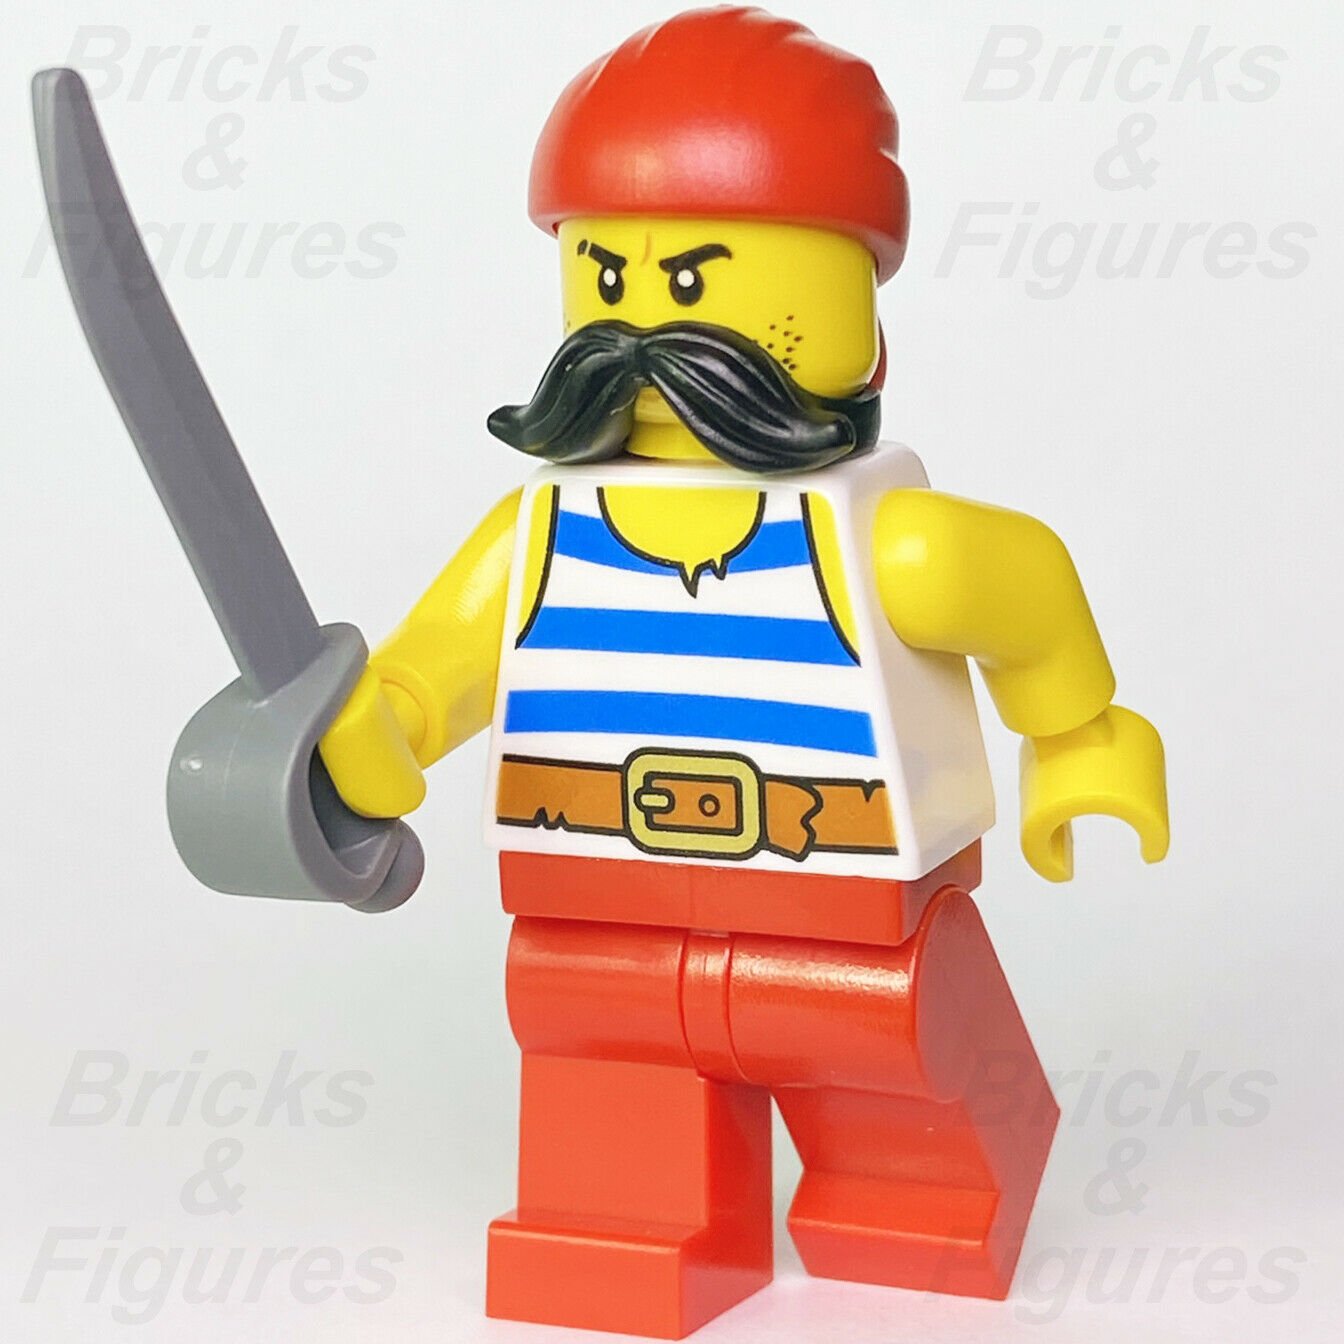 New Ideas LEGO Starboard Pirates Minifigure with Sword from set 21322 idea068 - Bricks & Figures